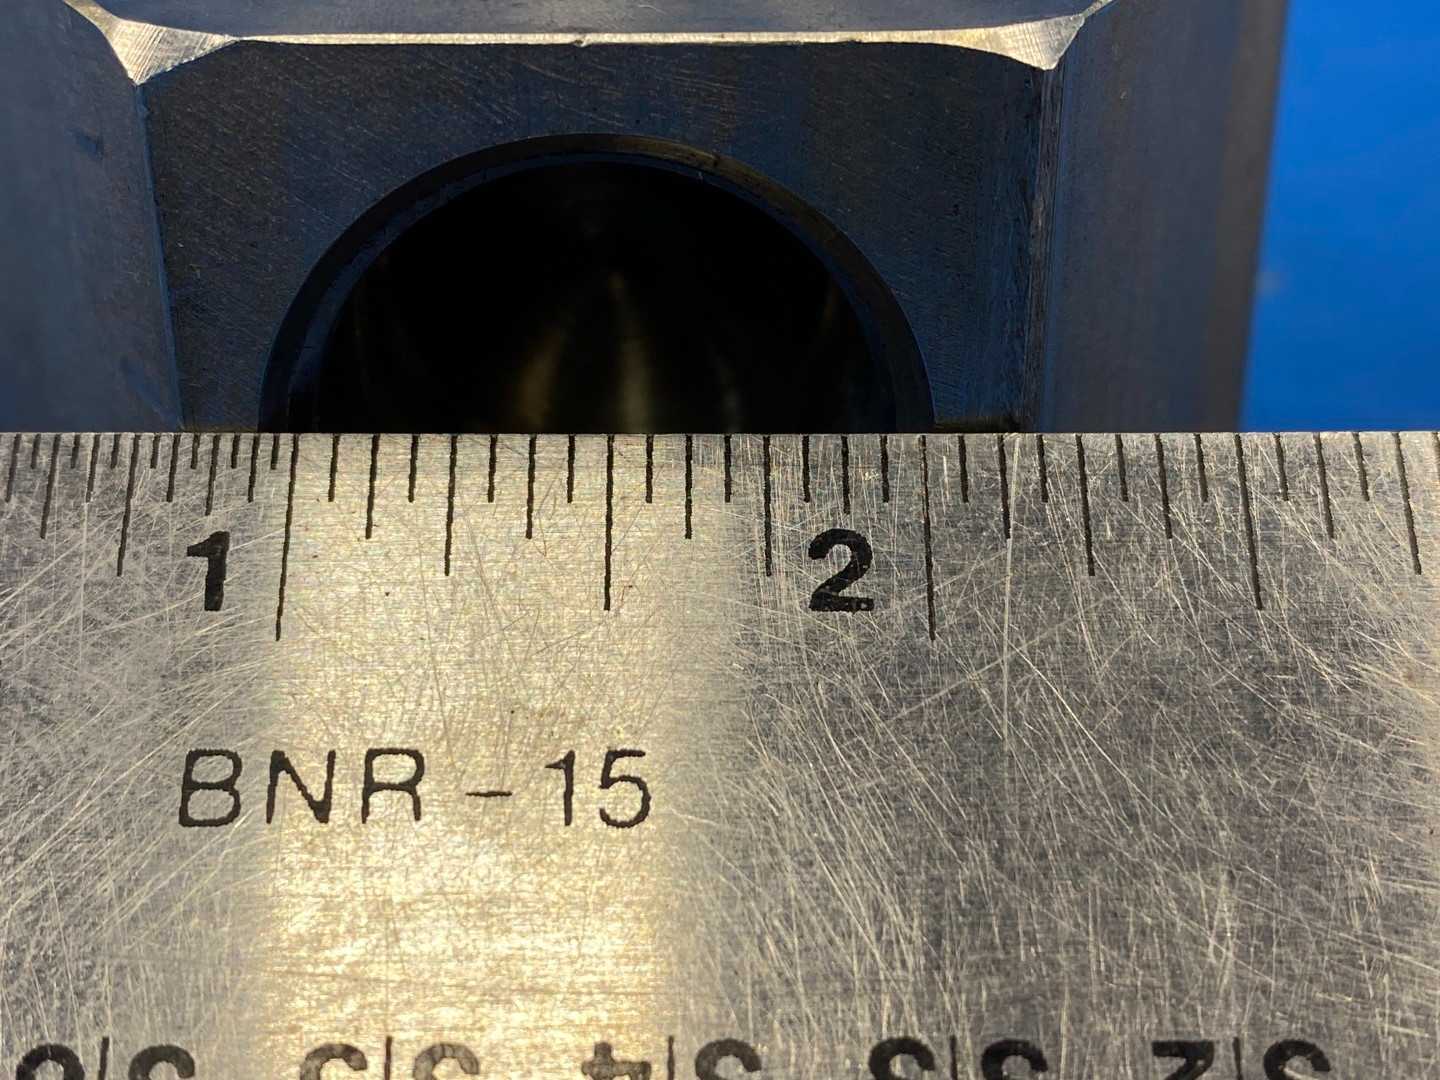 ARMSTRONG ALL POSITION STN.ST CONNECTOR 3/4" NPT